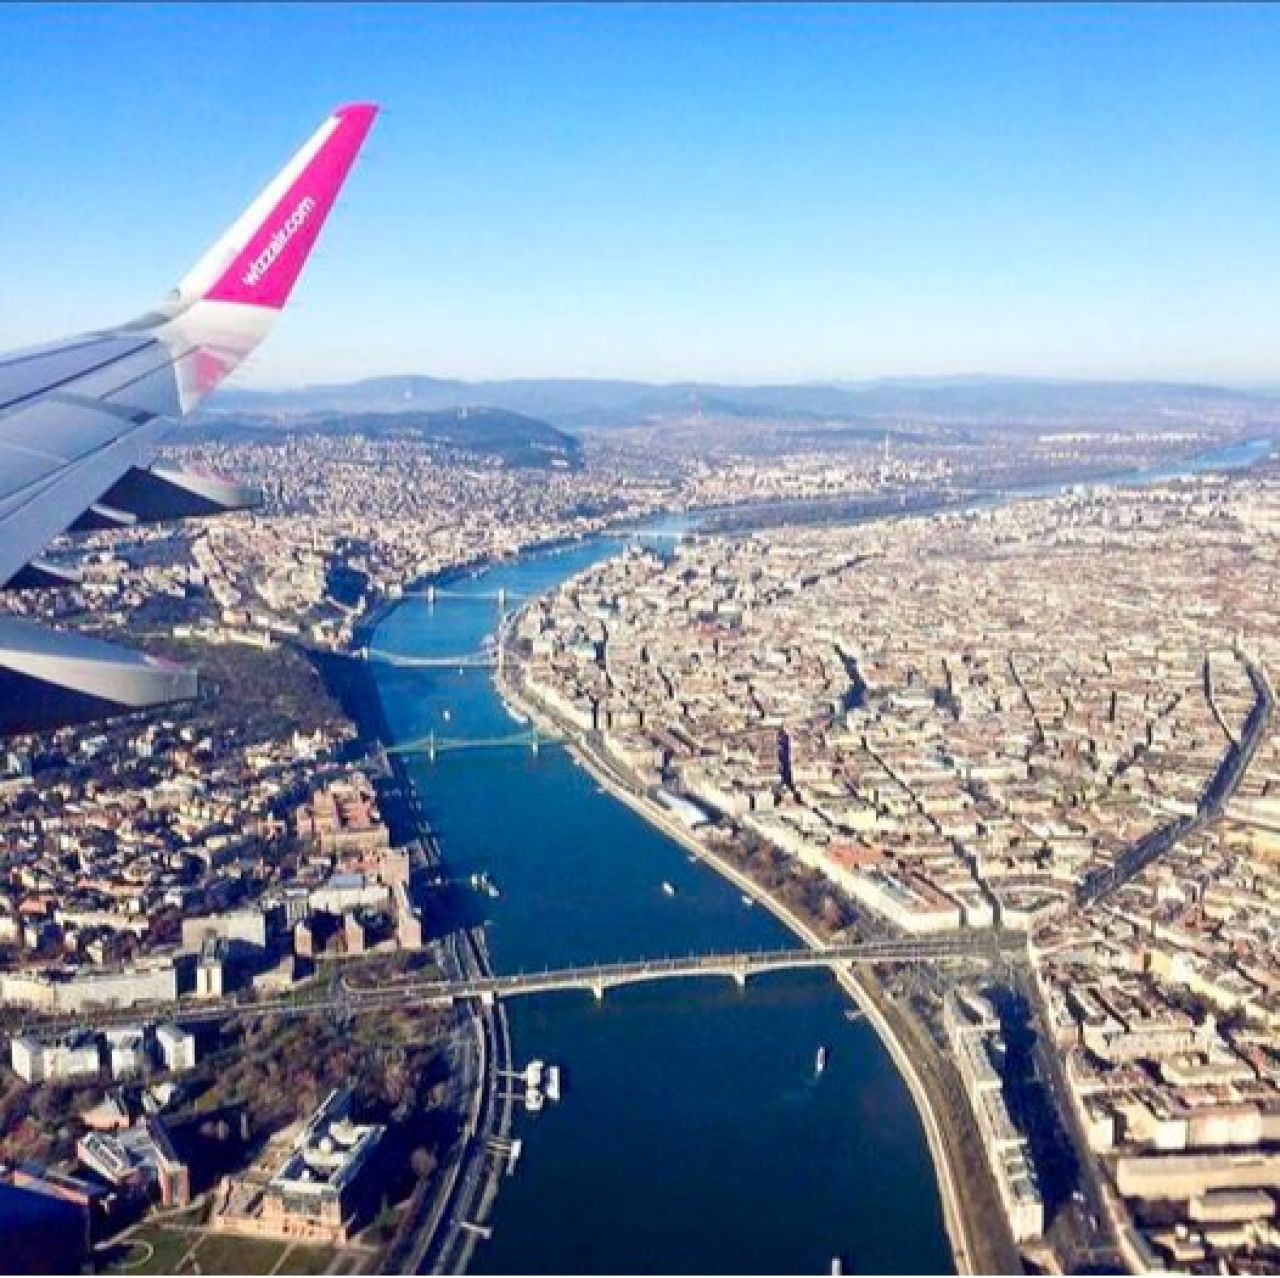 Wizz Air started operating flights on the route Budapest – Yerevan - Budapest